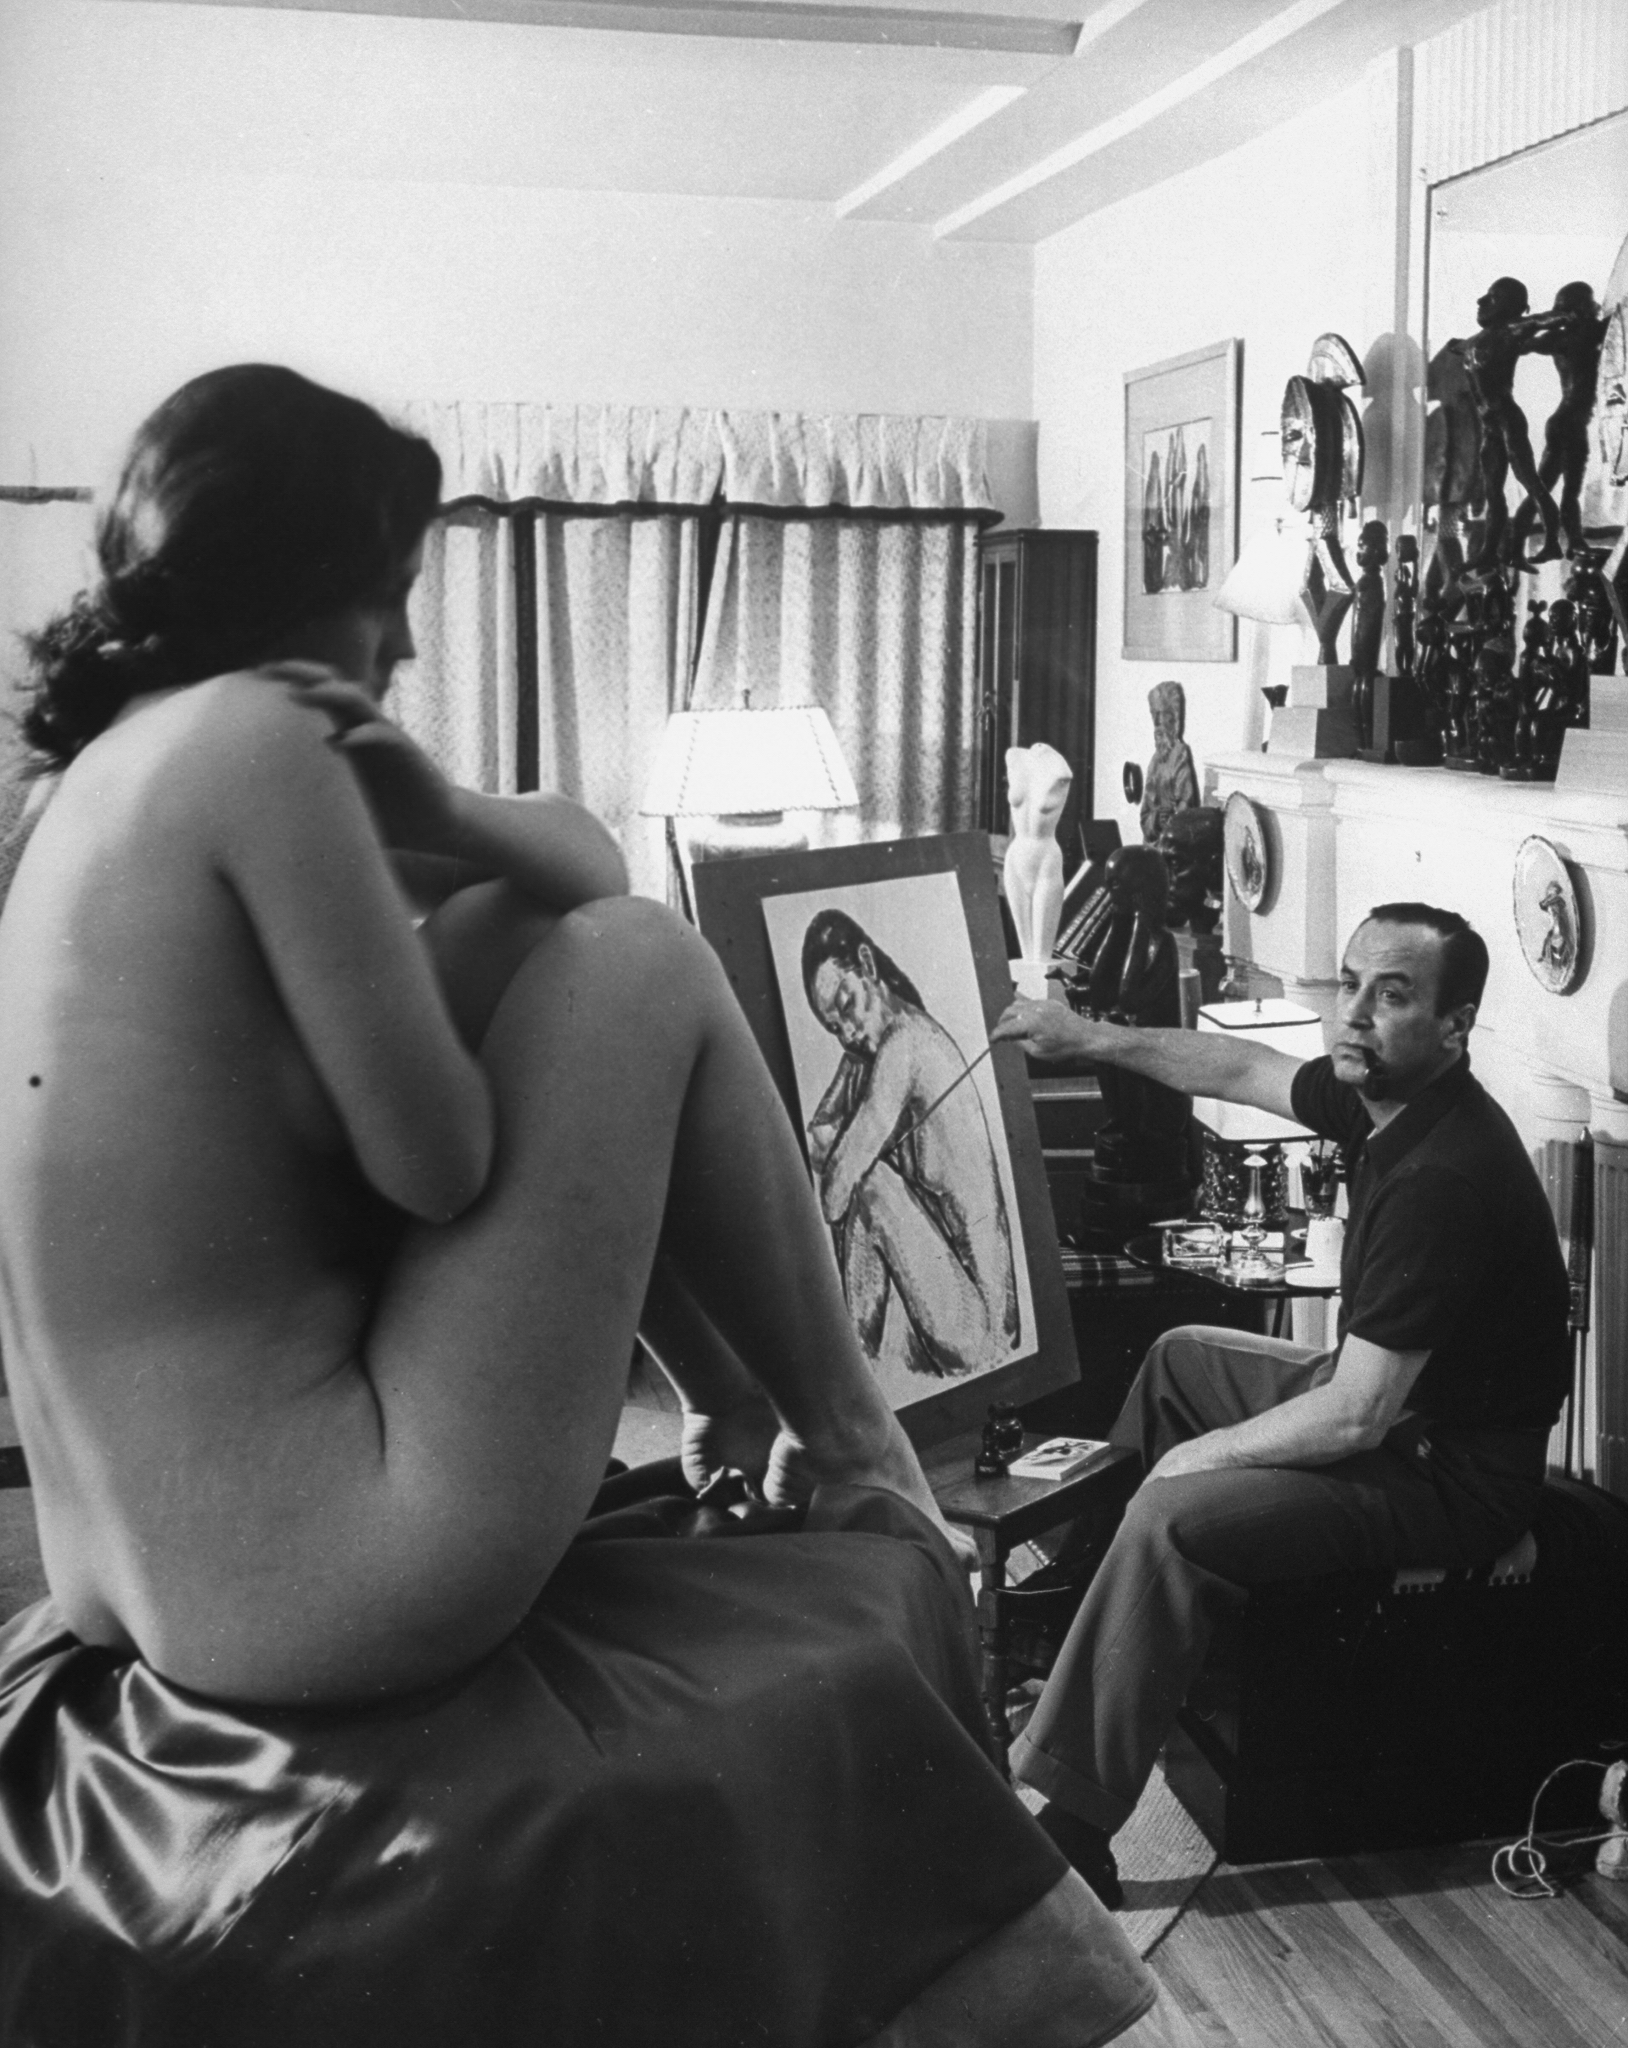 Jean Negulesco (1900 - 1993) paints a portrait of a nude model in his Hollywood studio.